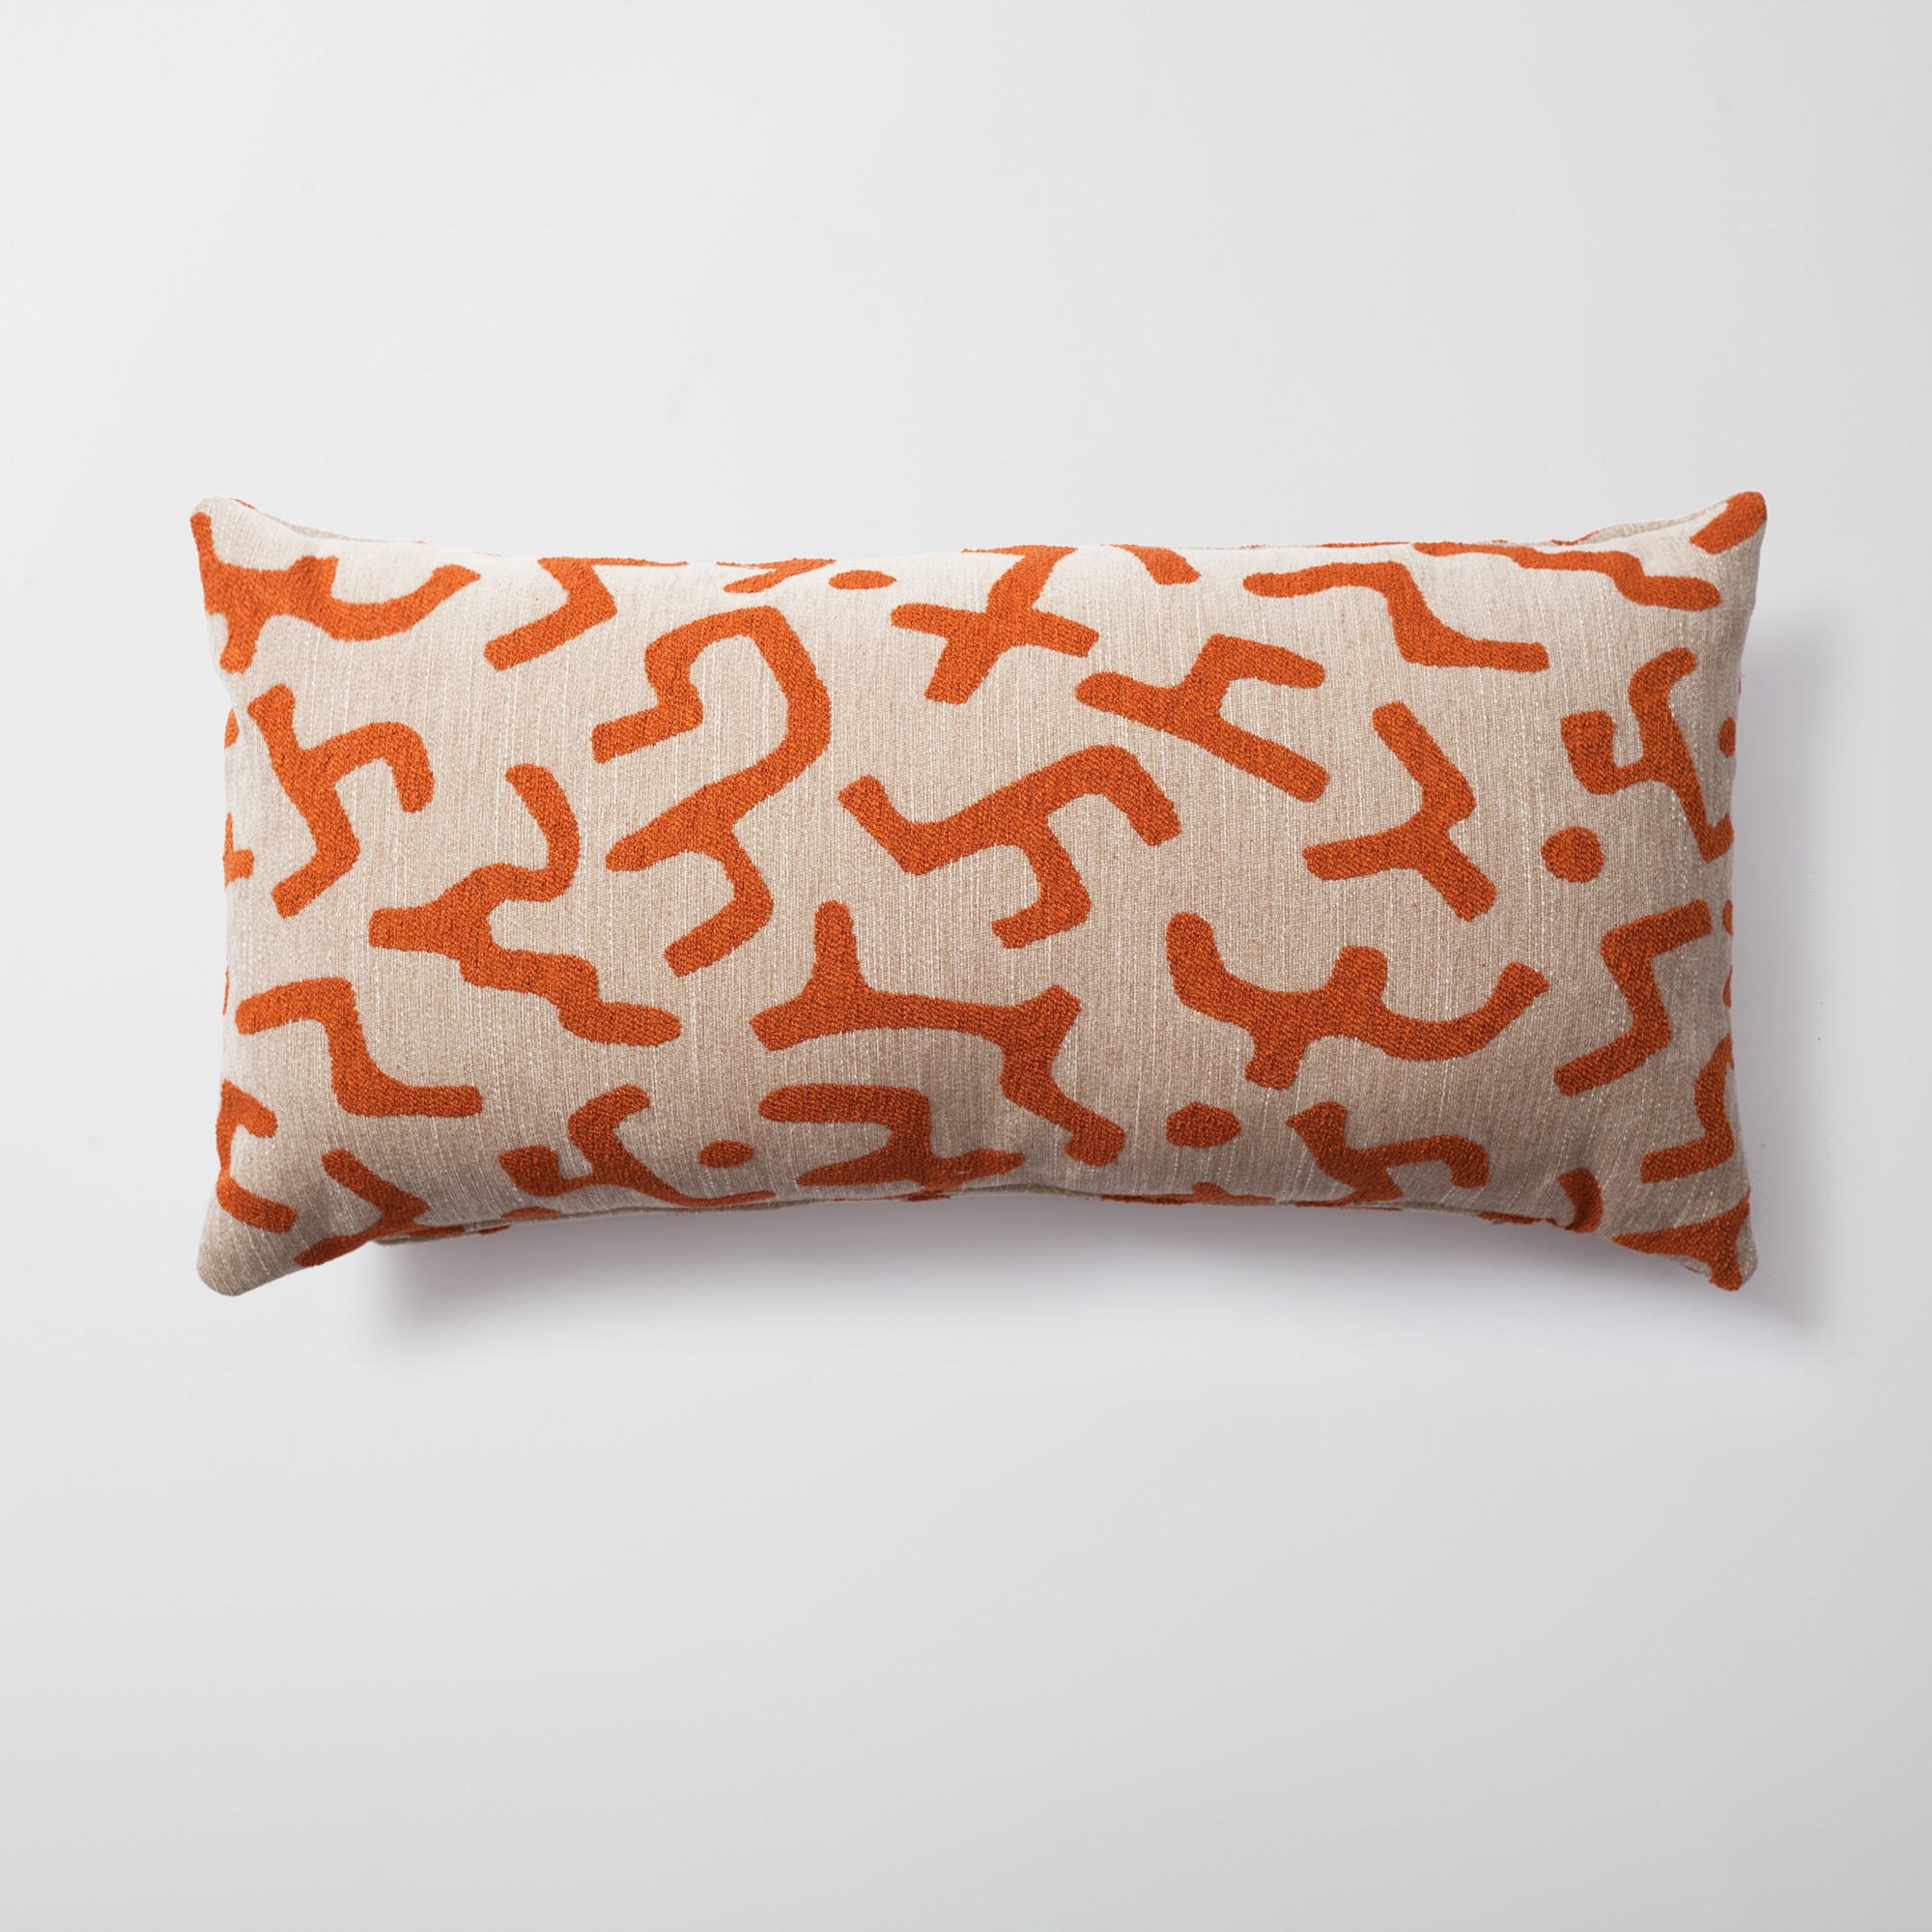 "Nandos" - Maze Patterned 14x28 Inch Pillow - Orange (Cover Only)